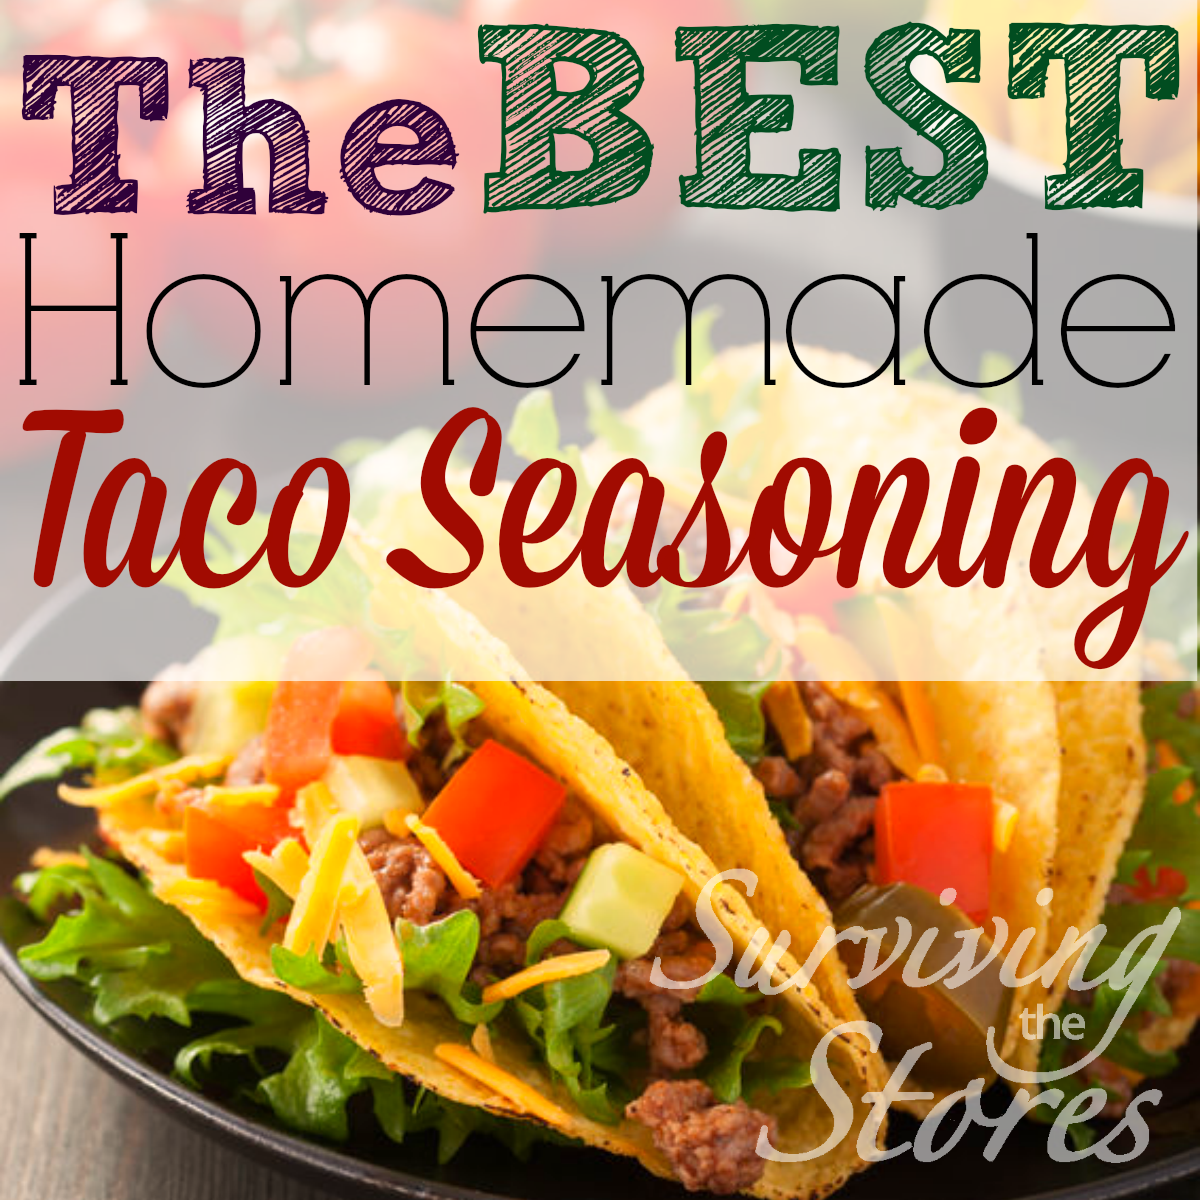 Super Easy Homemade Taco Seasoning!!  Tastes SO much better than anything you can find in the store. (and no extra nasty chemicals!)